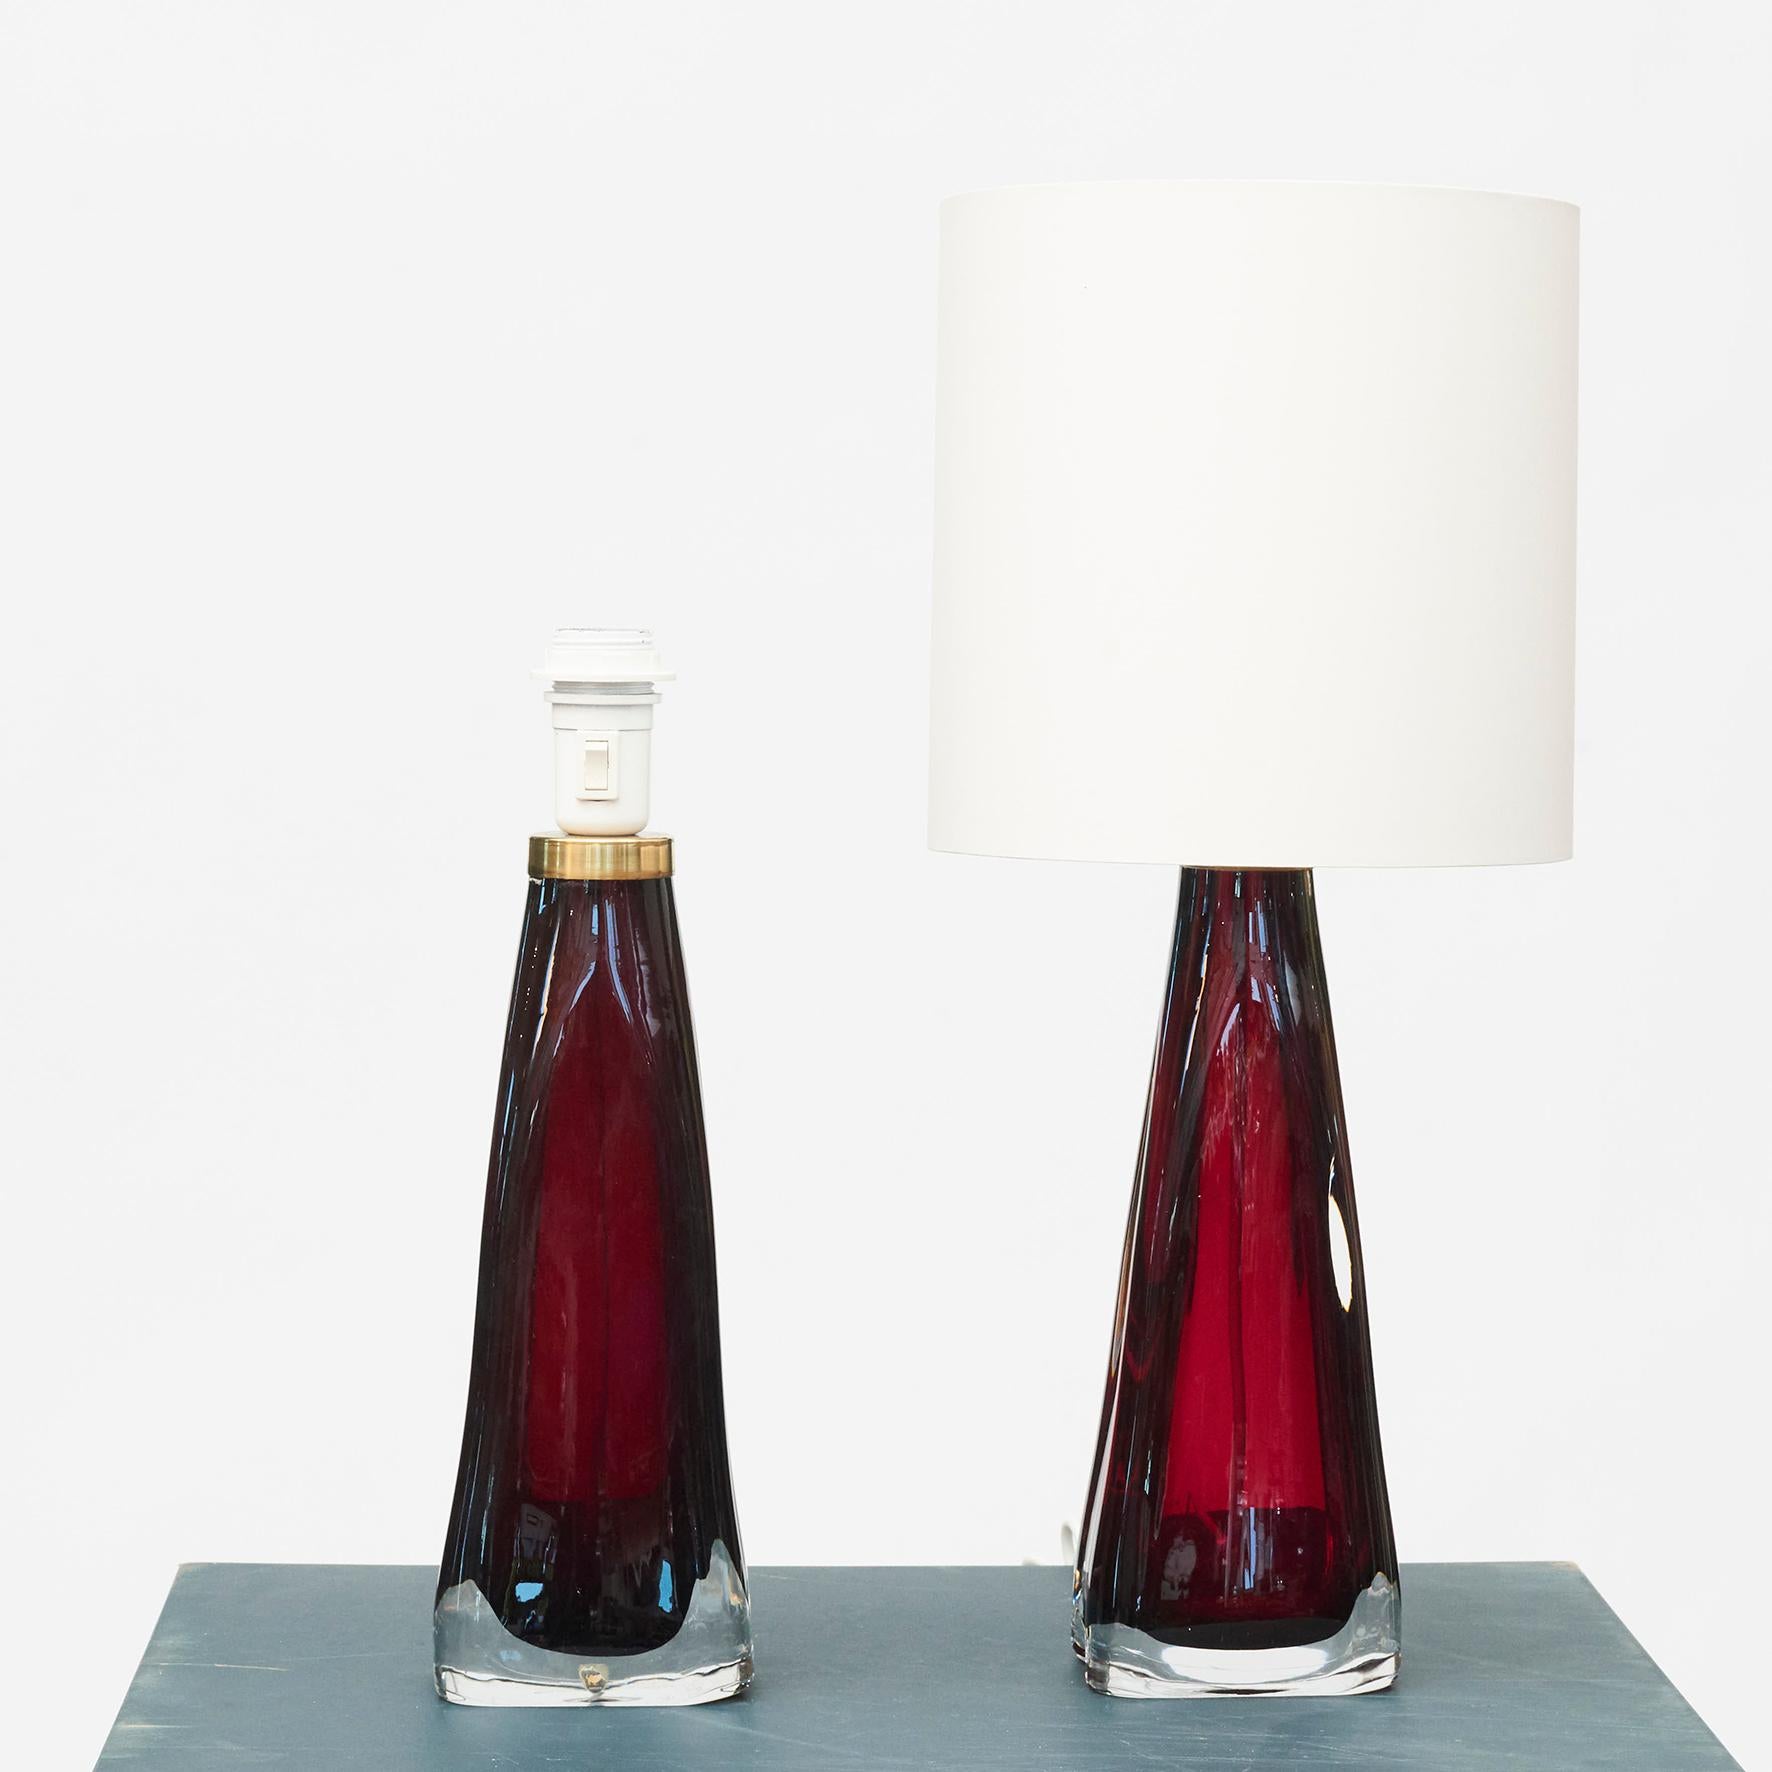 Pair of red glass table lamps by Carl Fagerlund (1915-2011) for Orrefors. 
Sweden approx. 1960.
Lampshades with blue-white fabric lining. 
Newly rewired and new socket.

Lamp: H: 41 - W: 12 - D: 8
Incl. shade: H: 57